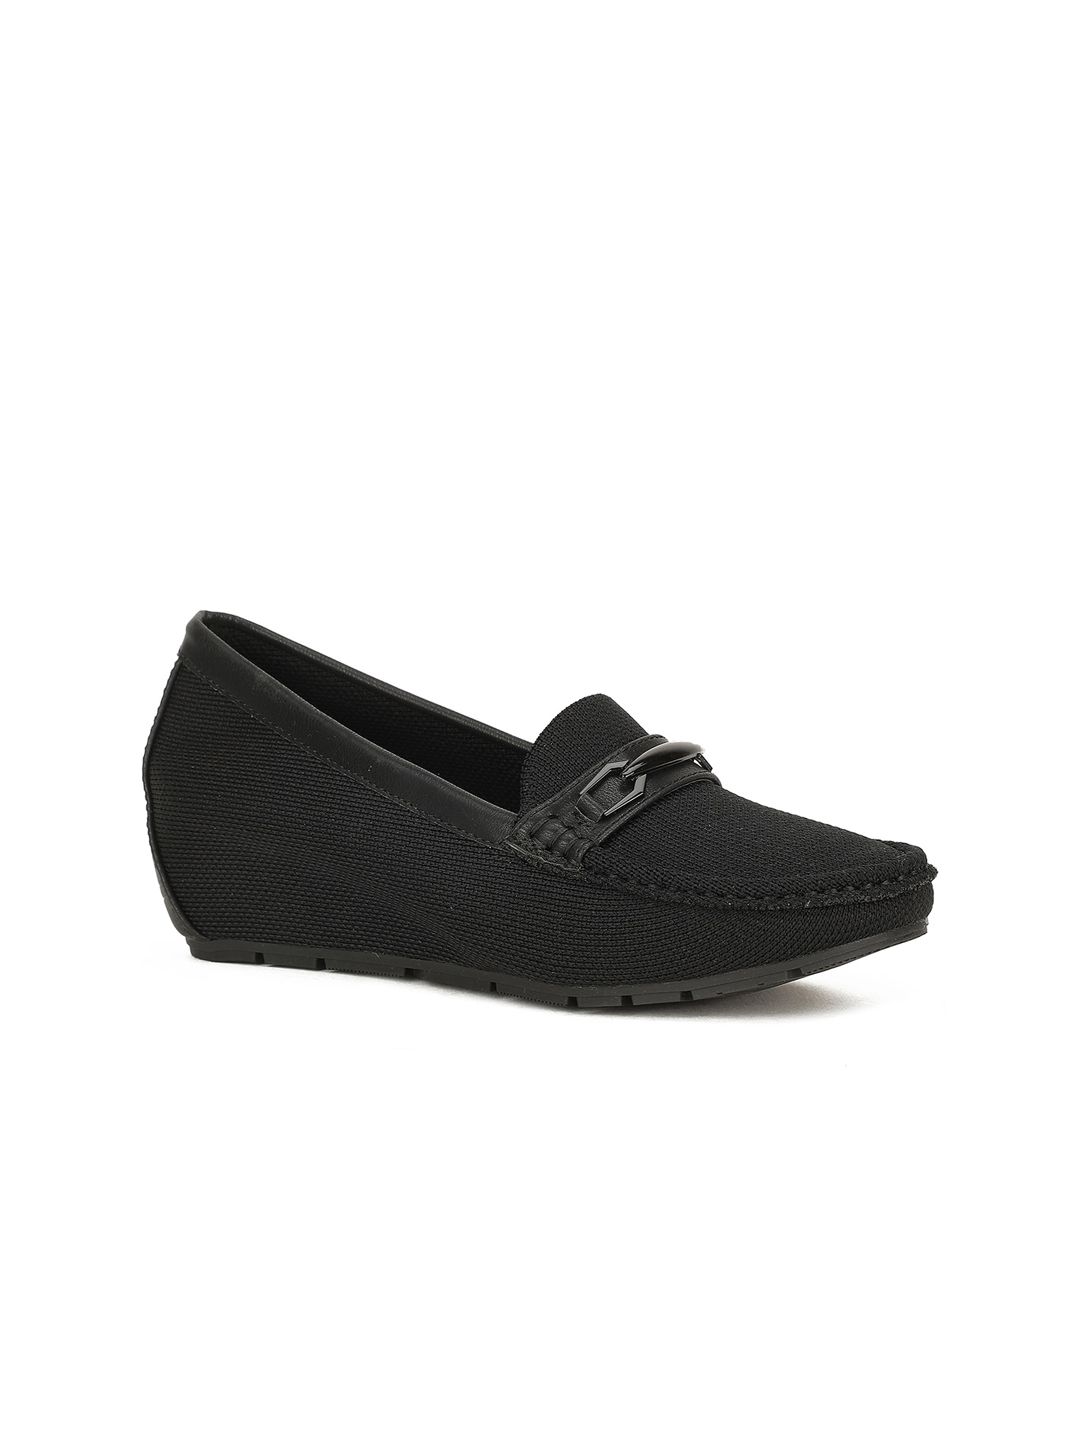 Bata Women Black Solid PU Loafers Price in India